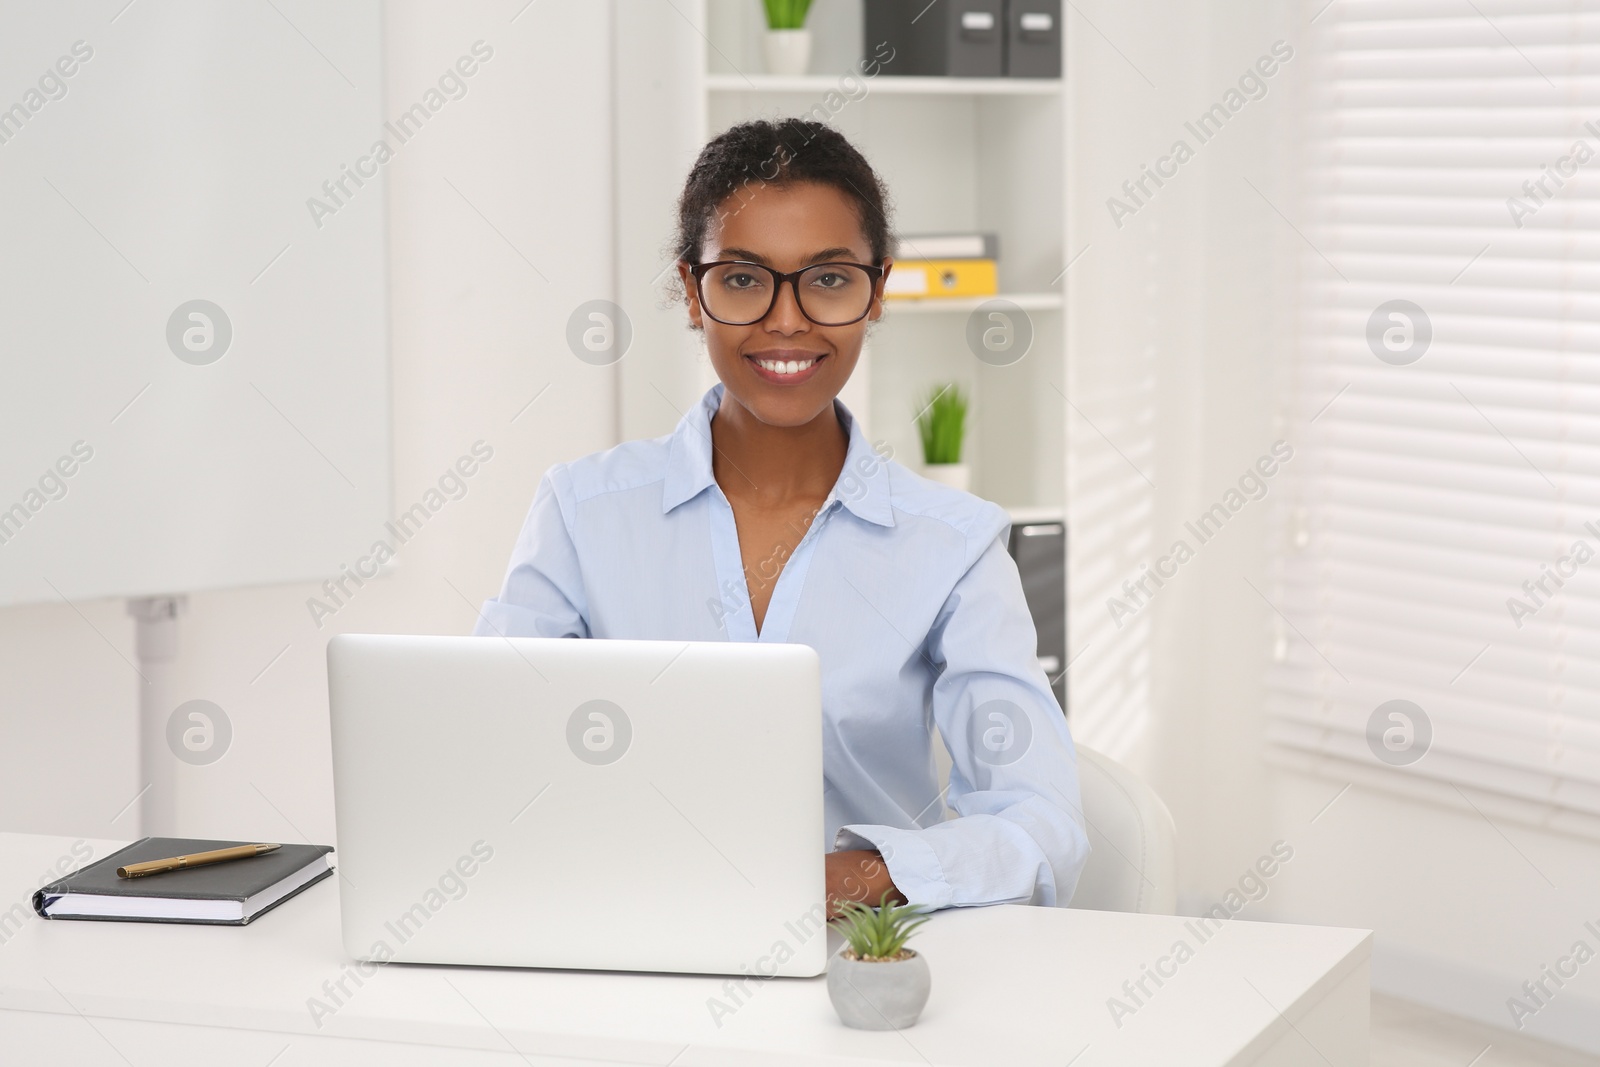 Photo of Smiling African American intern working on laptop at white table in office